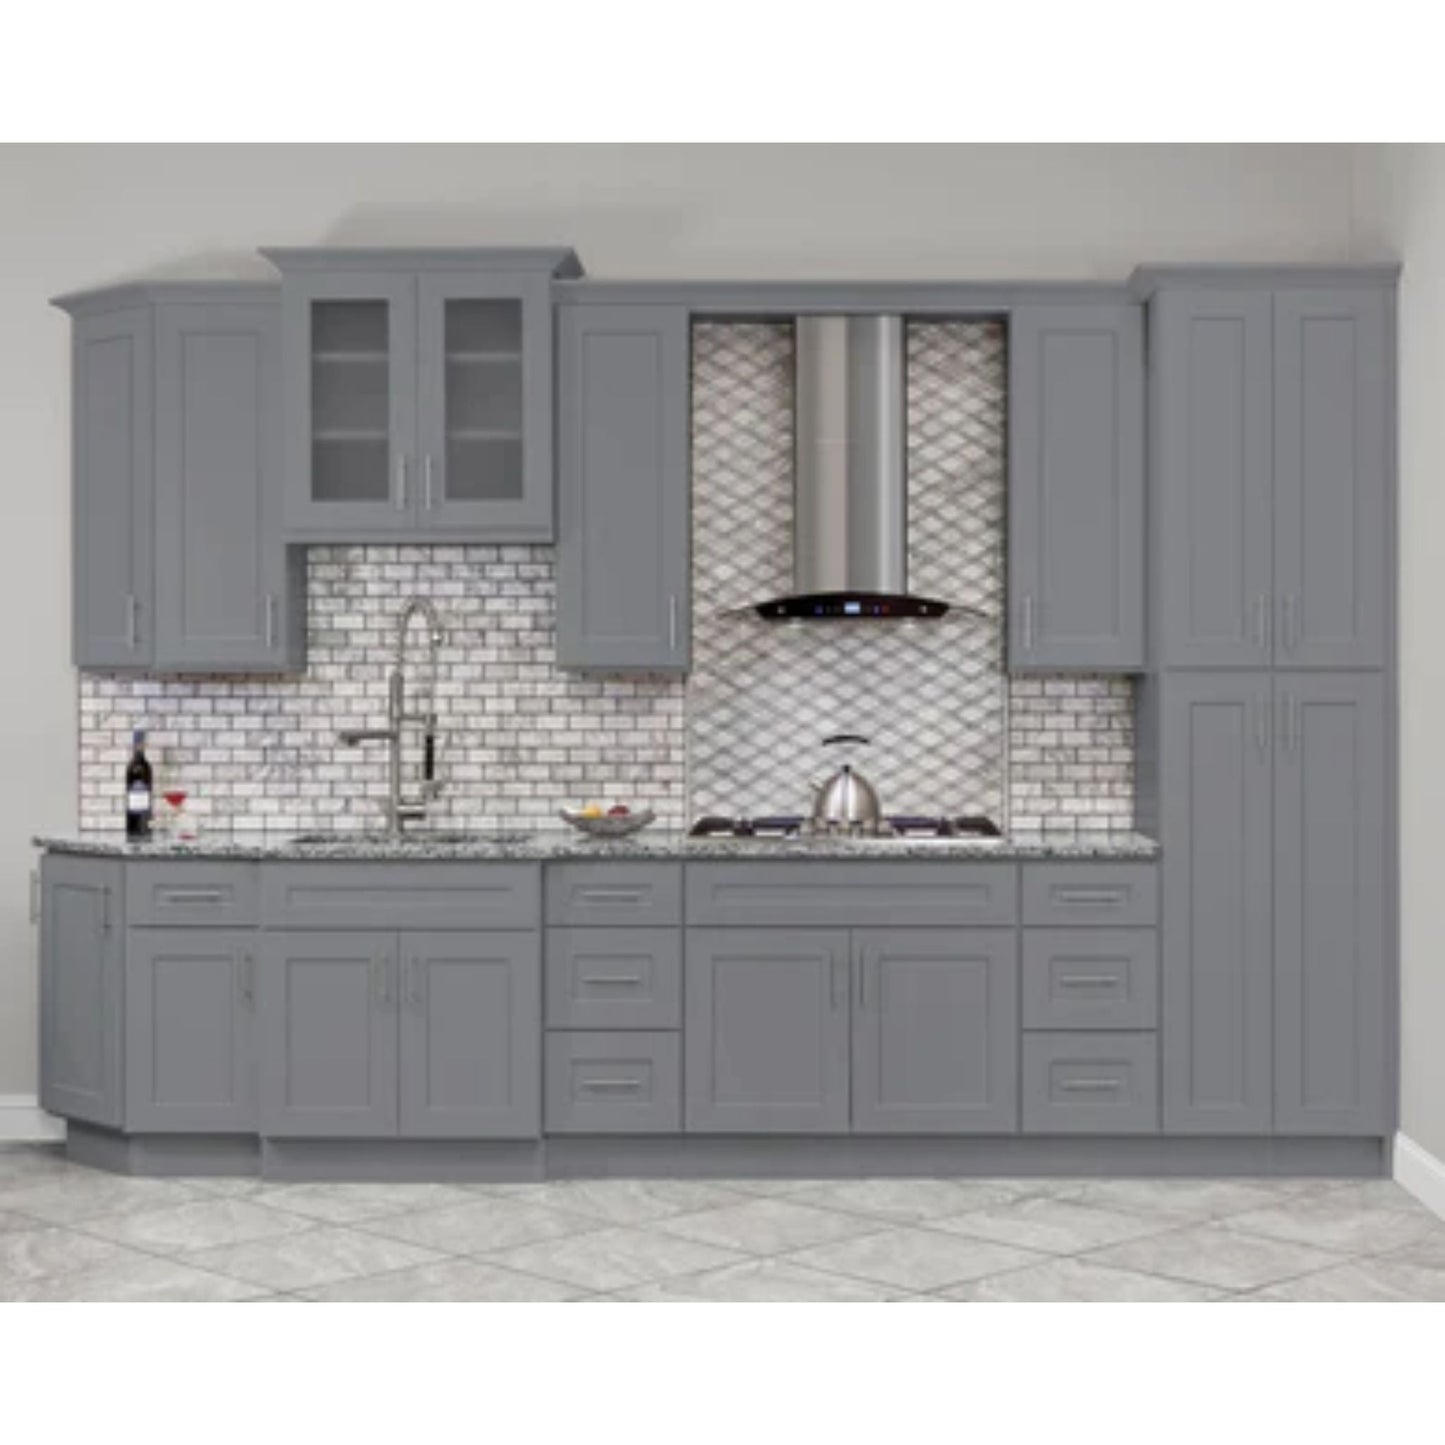 LessCare 30" x 42" x 12" Colonial Gray Wall Kitchen Cabinet - W3042